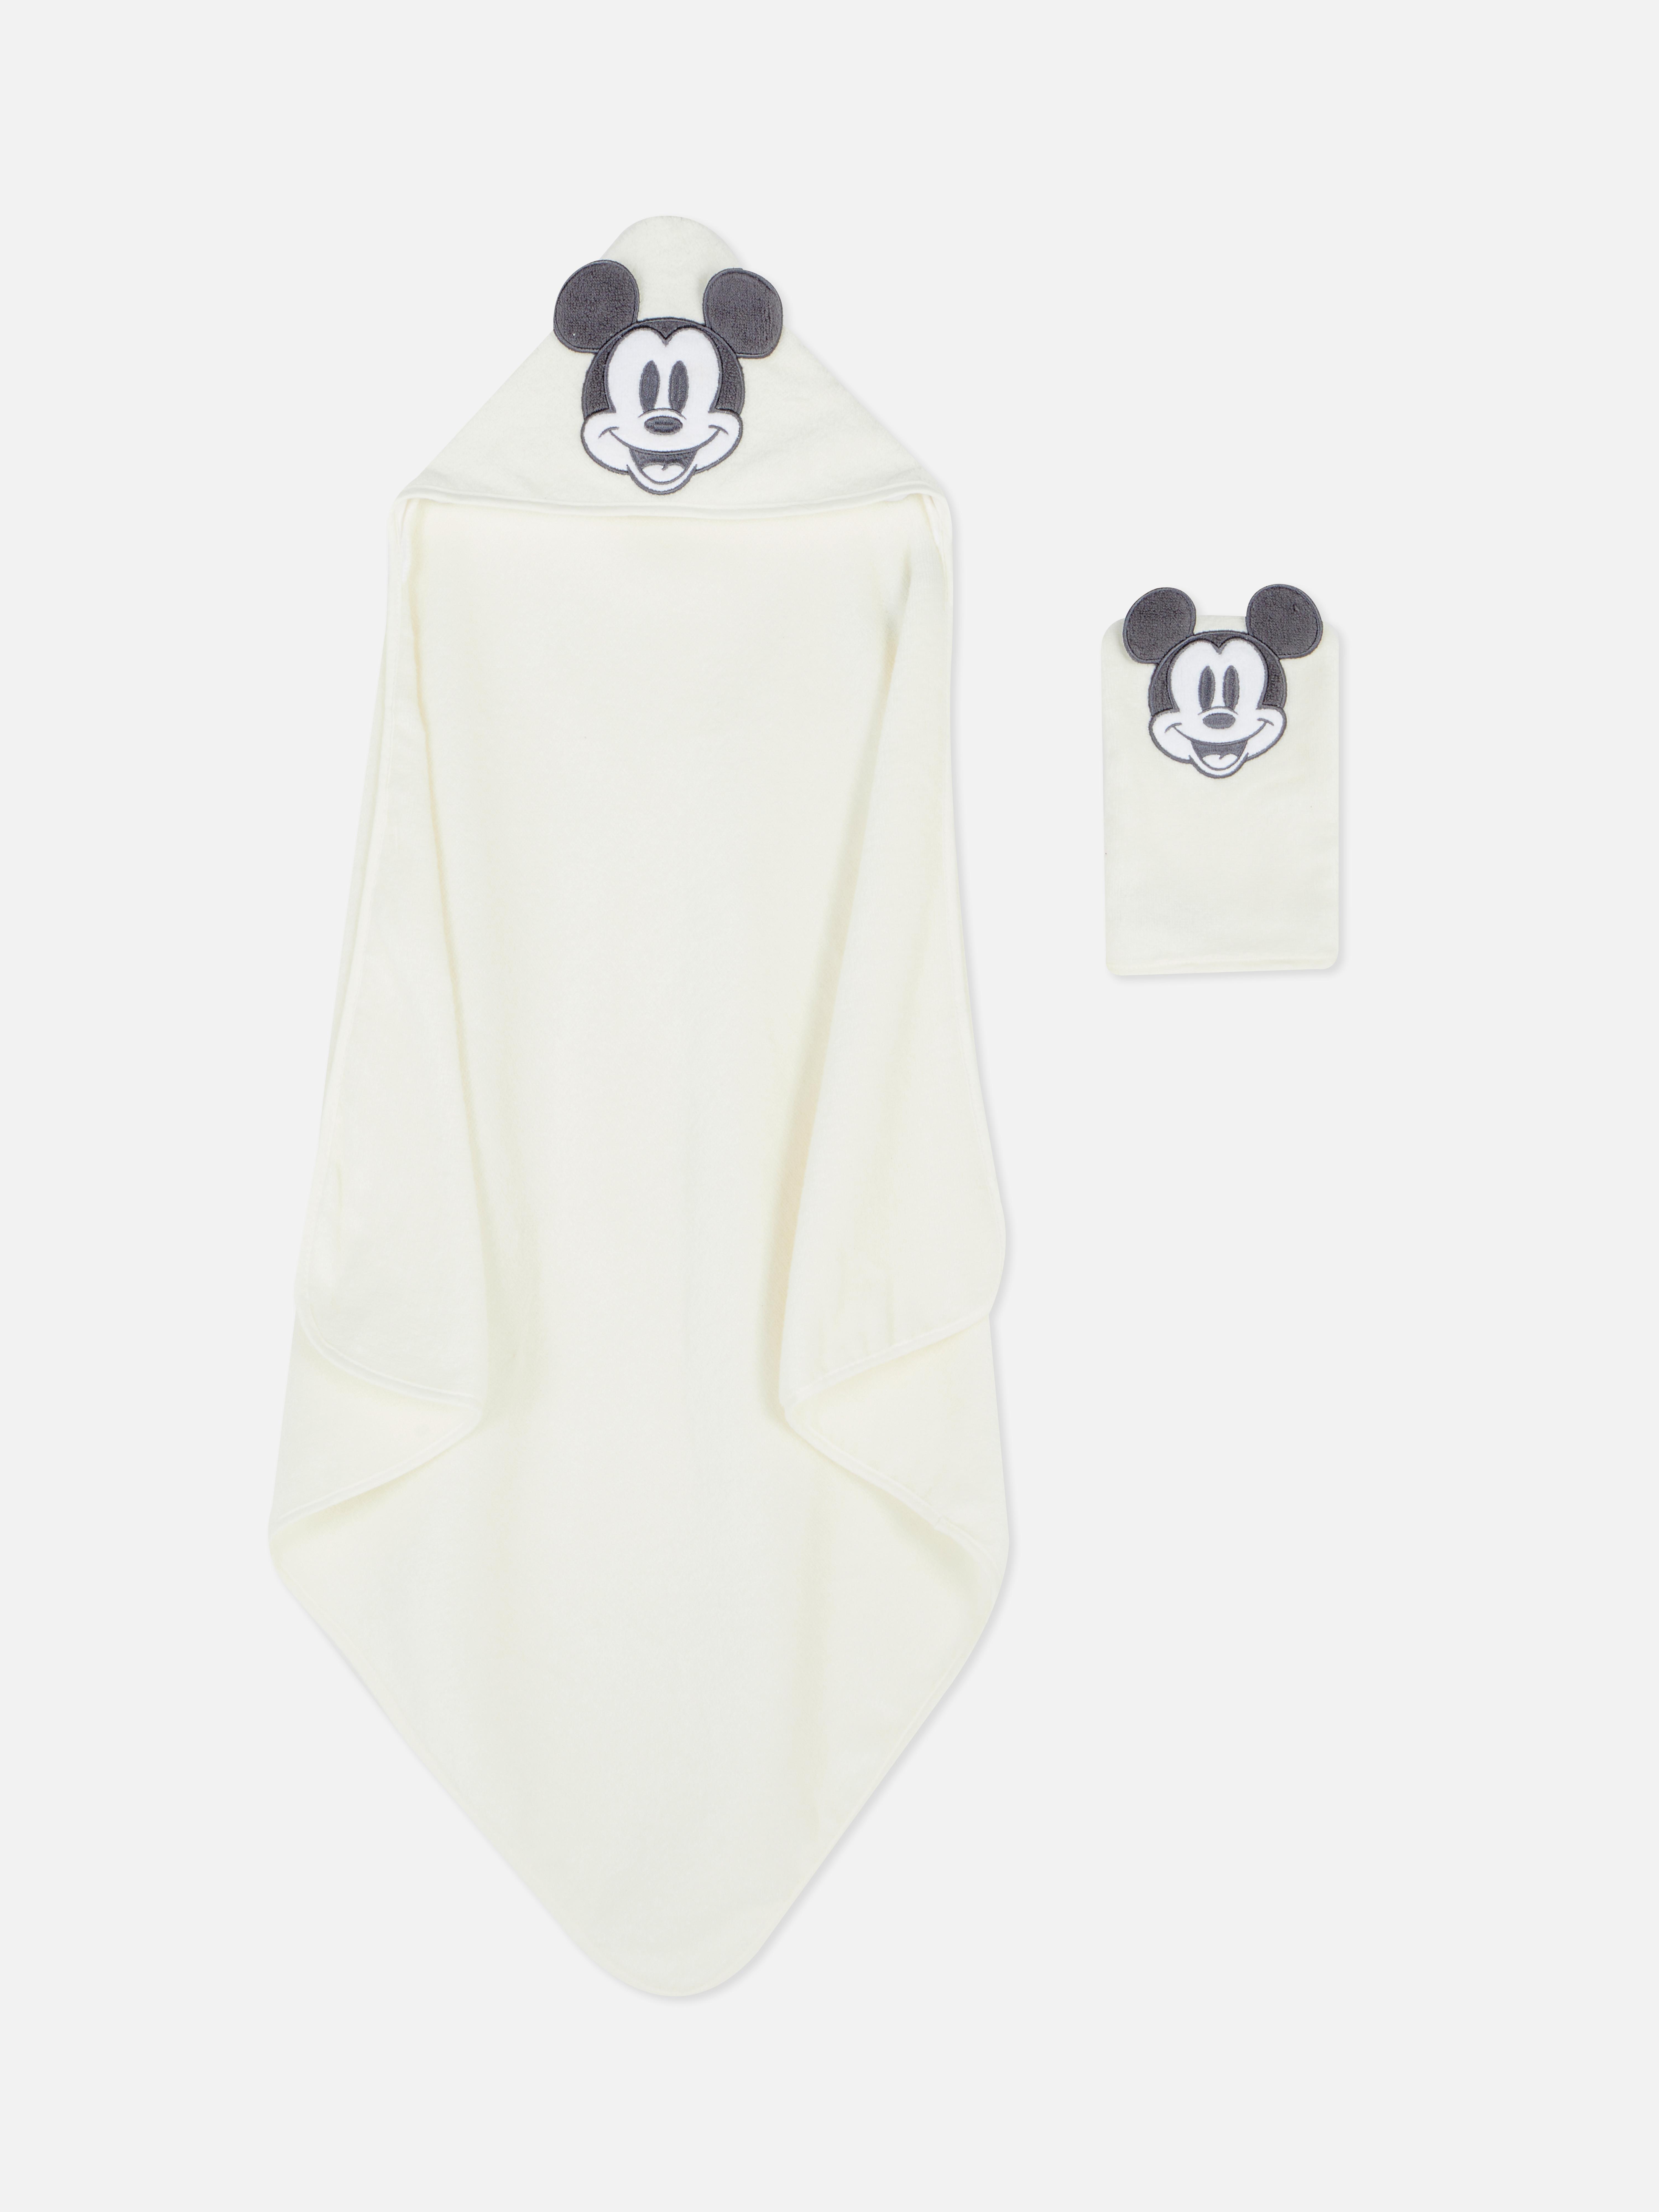 Disney's Mickey Mouse Hooded Towel and Washcloth